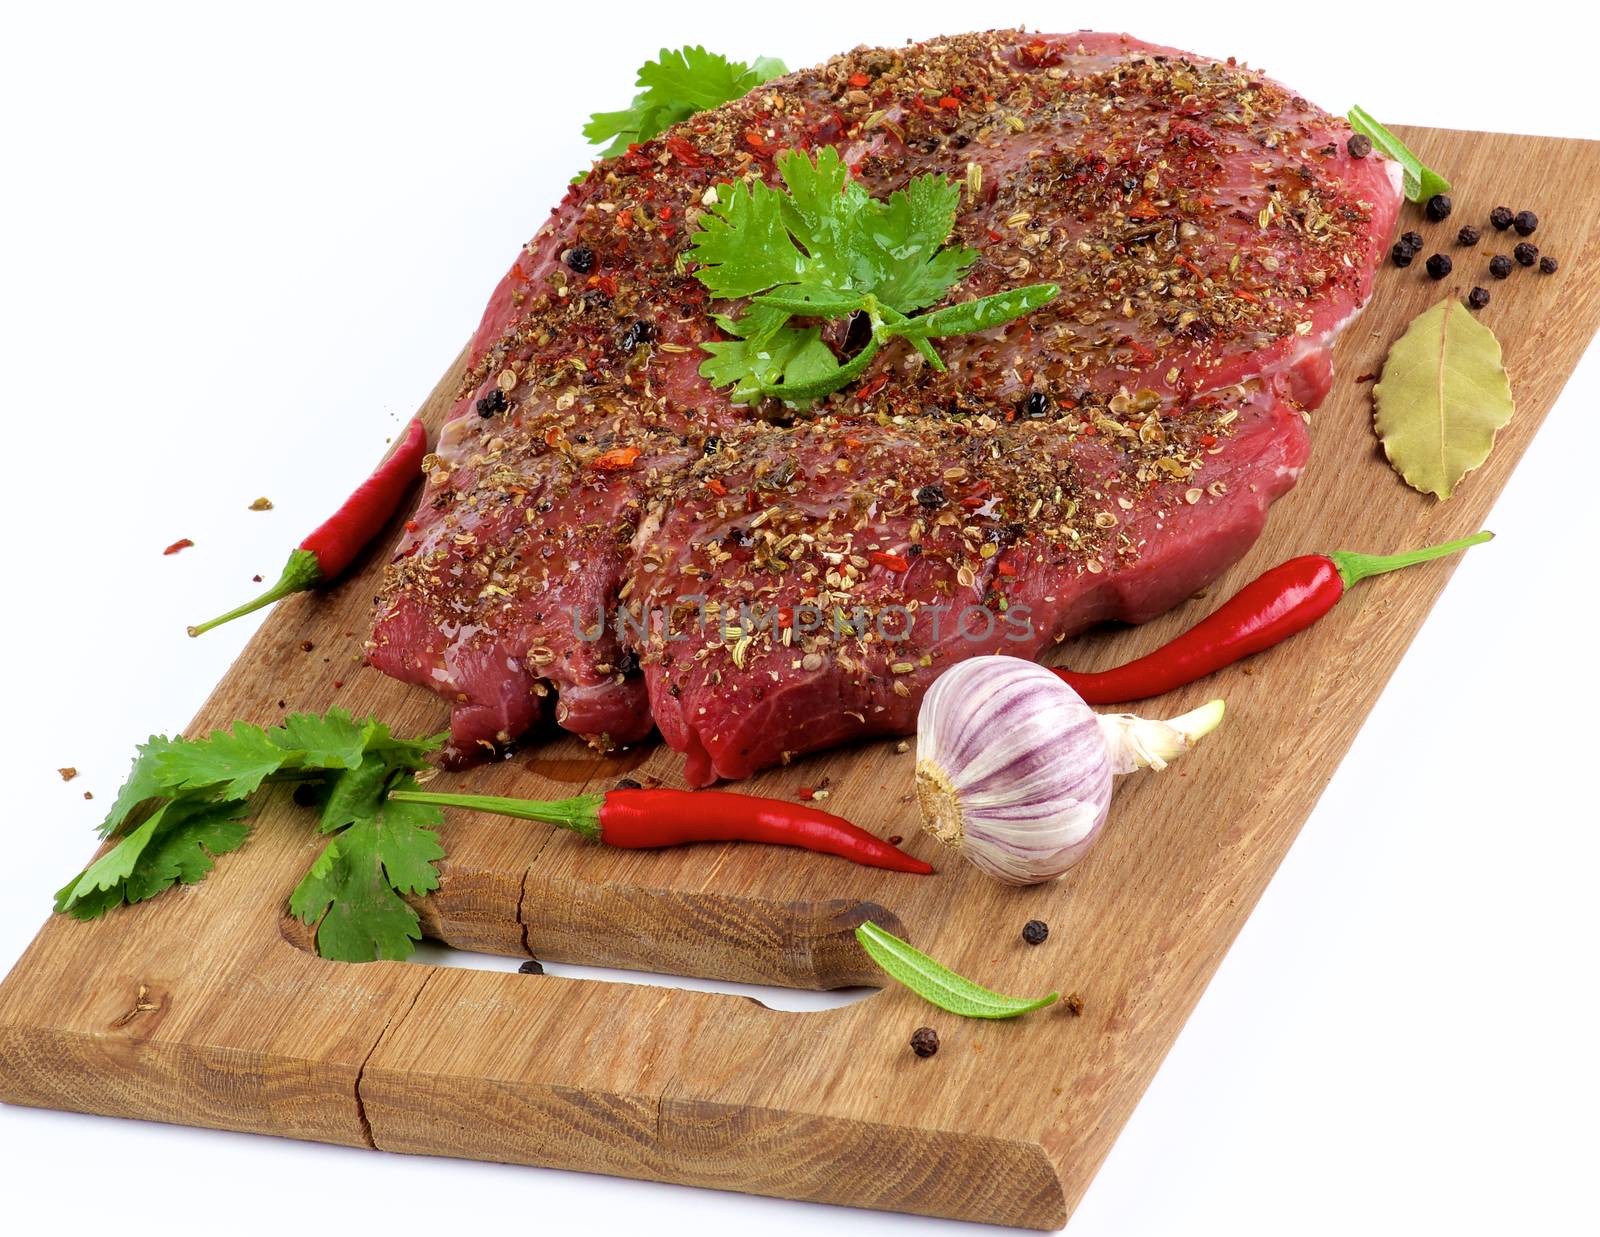 Marinated Raw Boneless Beef Shank with Herbs and Spices, Garlic and Chili Pepper on Wooden Cutting Board closeup on White background